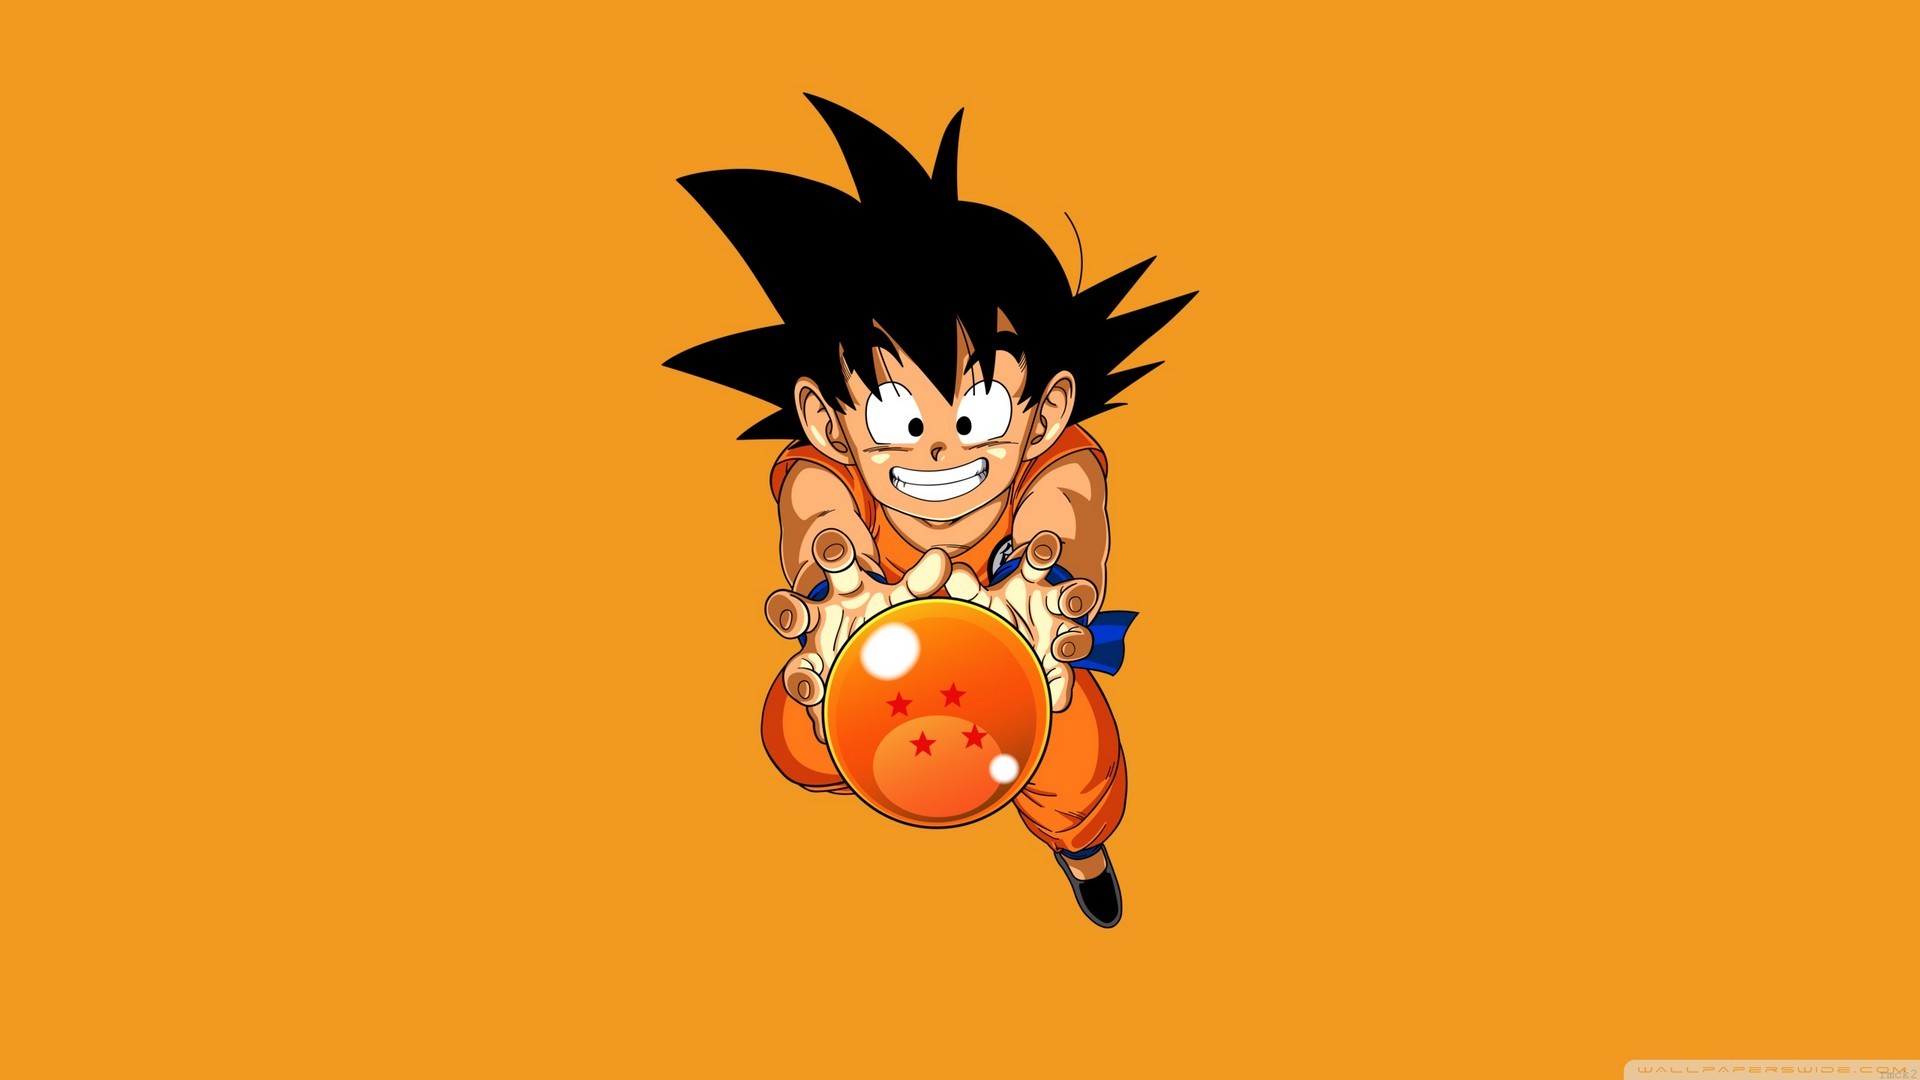 Kid Goku Desktop Wallpaper with resolution 1920X1080 pixel. You can use this wallpaper as background for your desktop Computer Screensavers, Android or iPhone smartphones